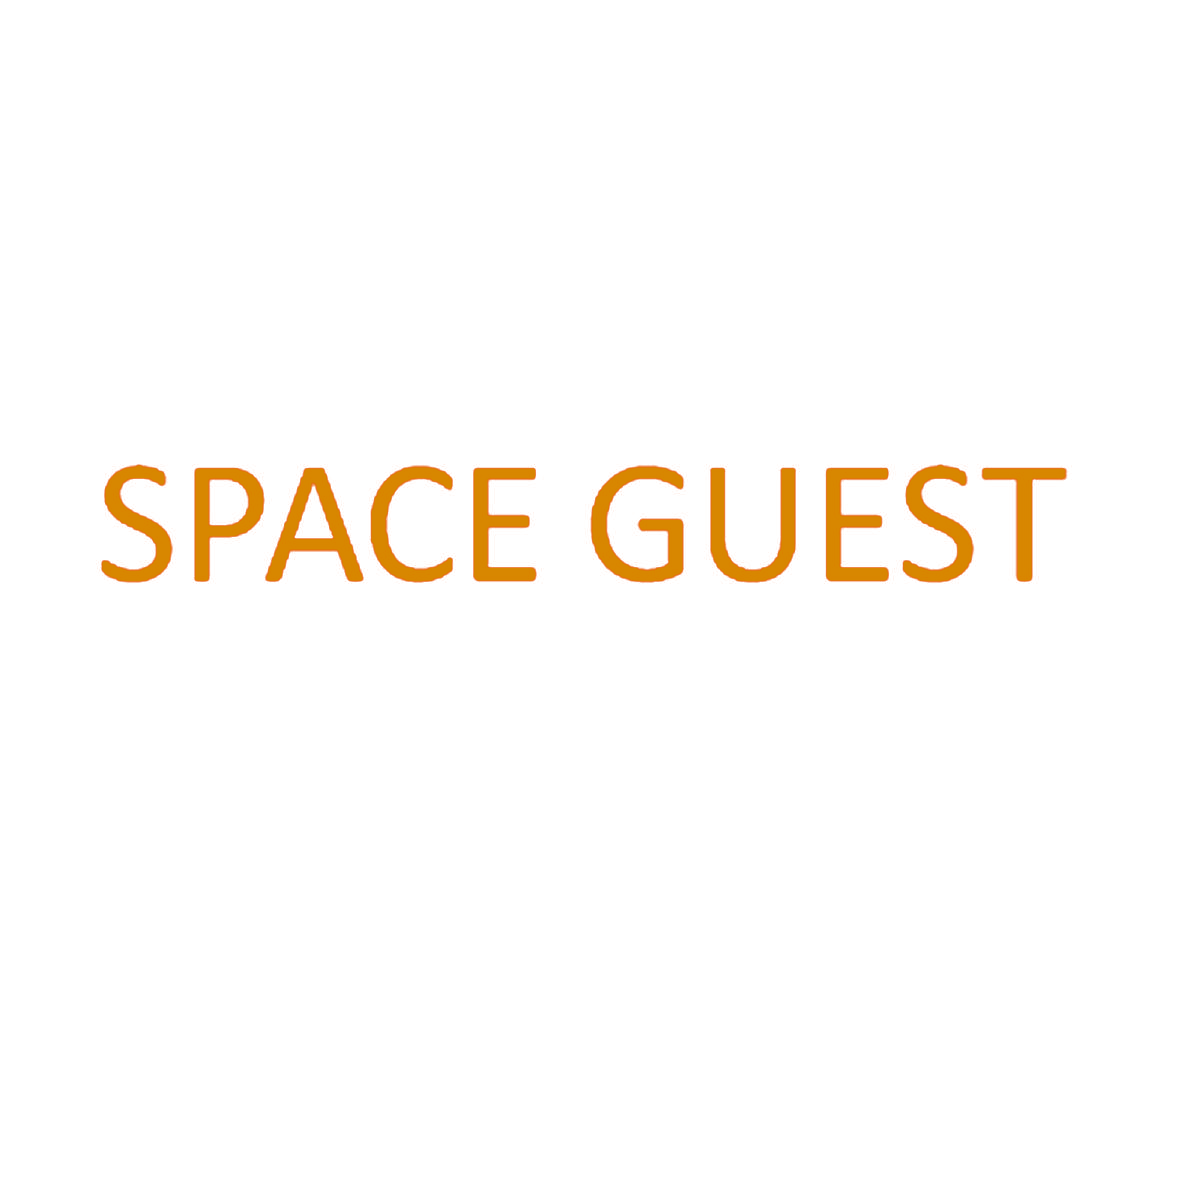 SPACE GUEST